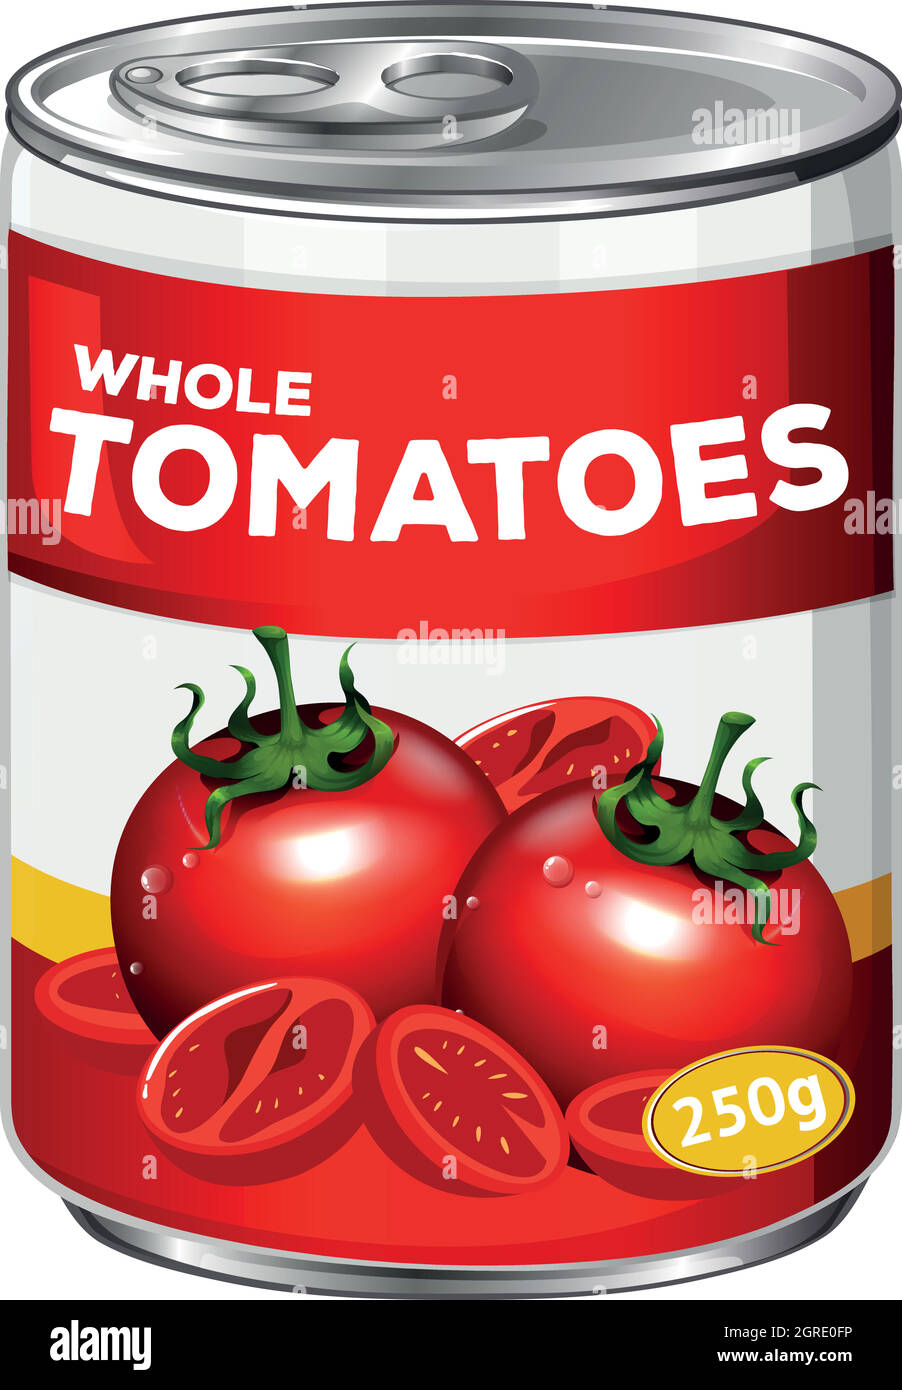 A Can of Whole Tomatoes Stock Vector